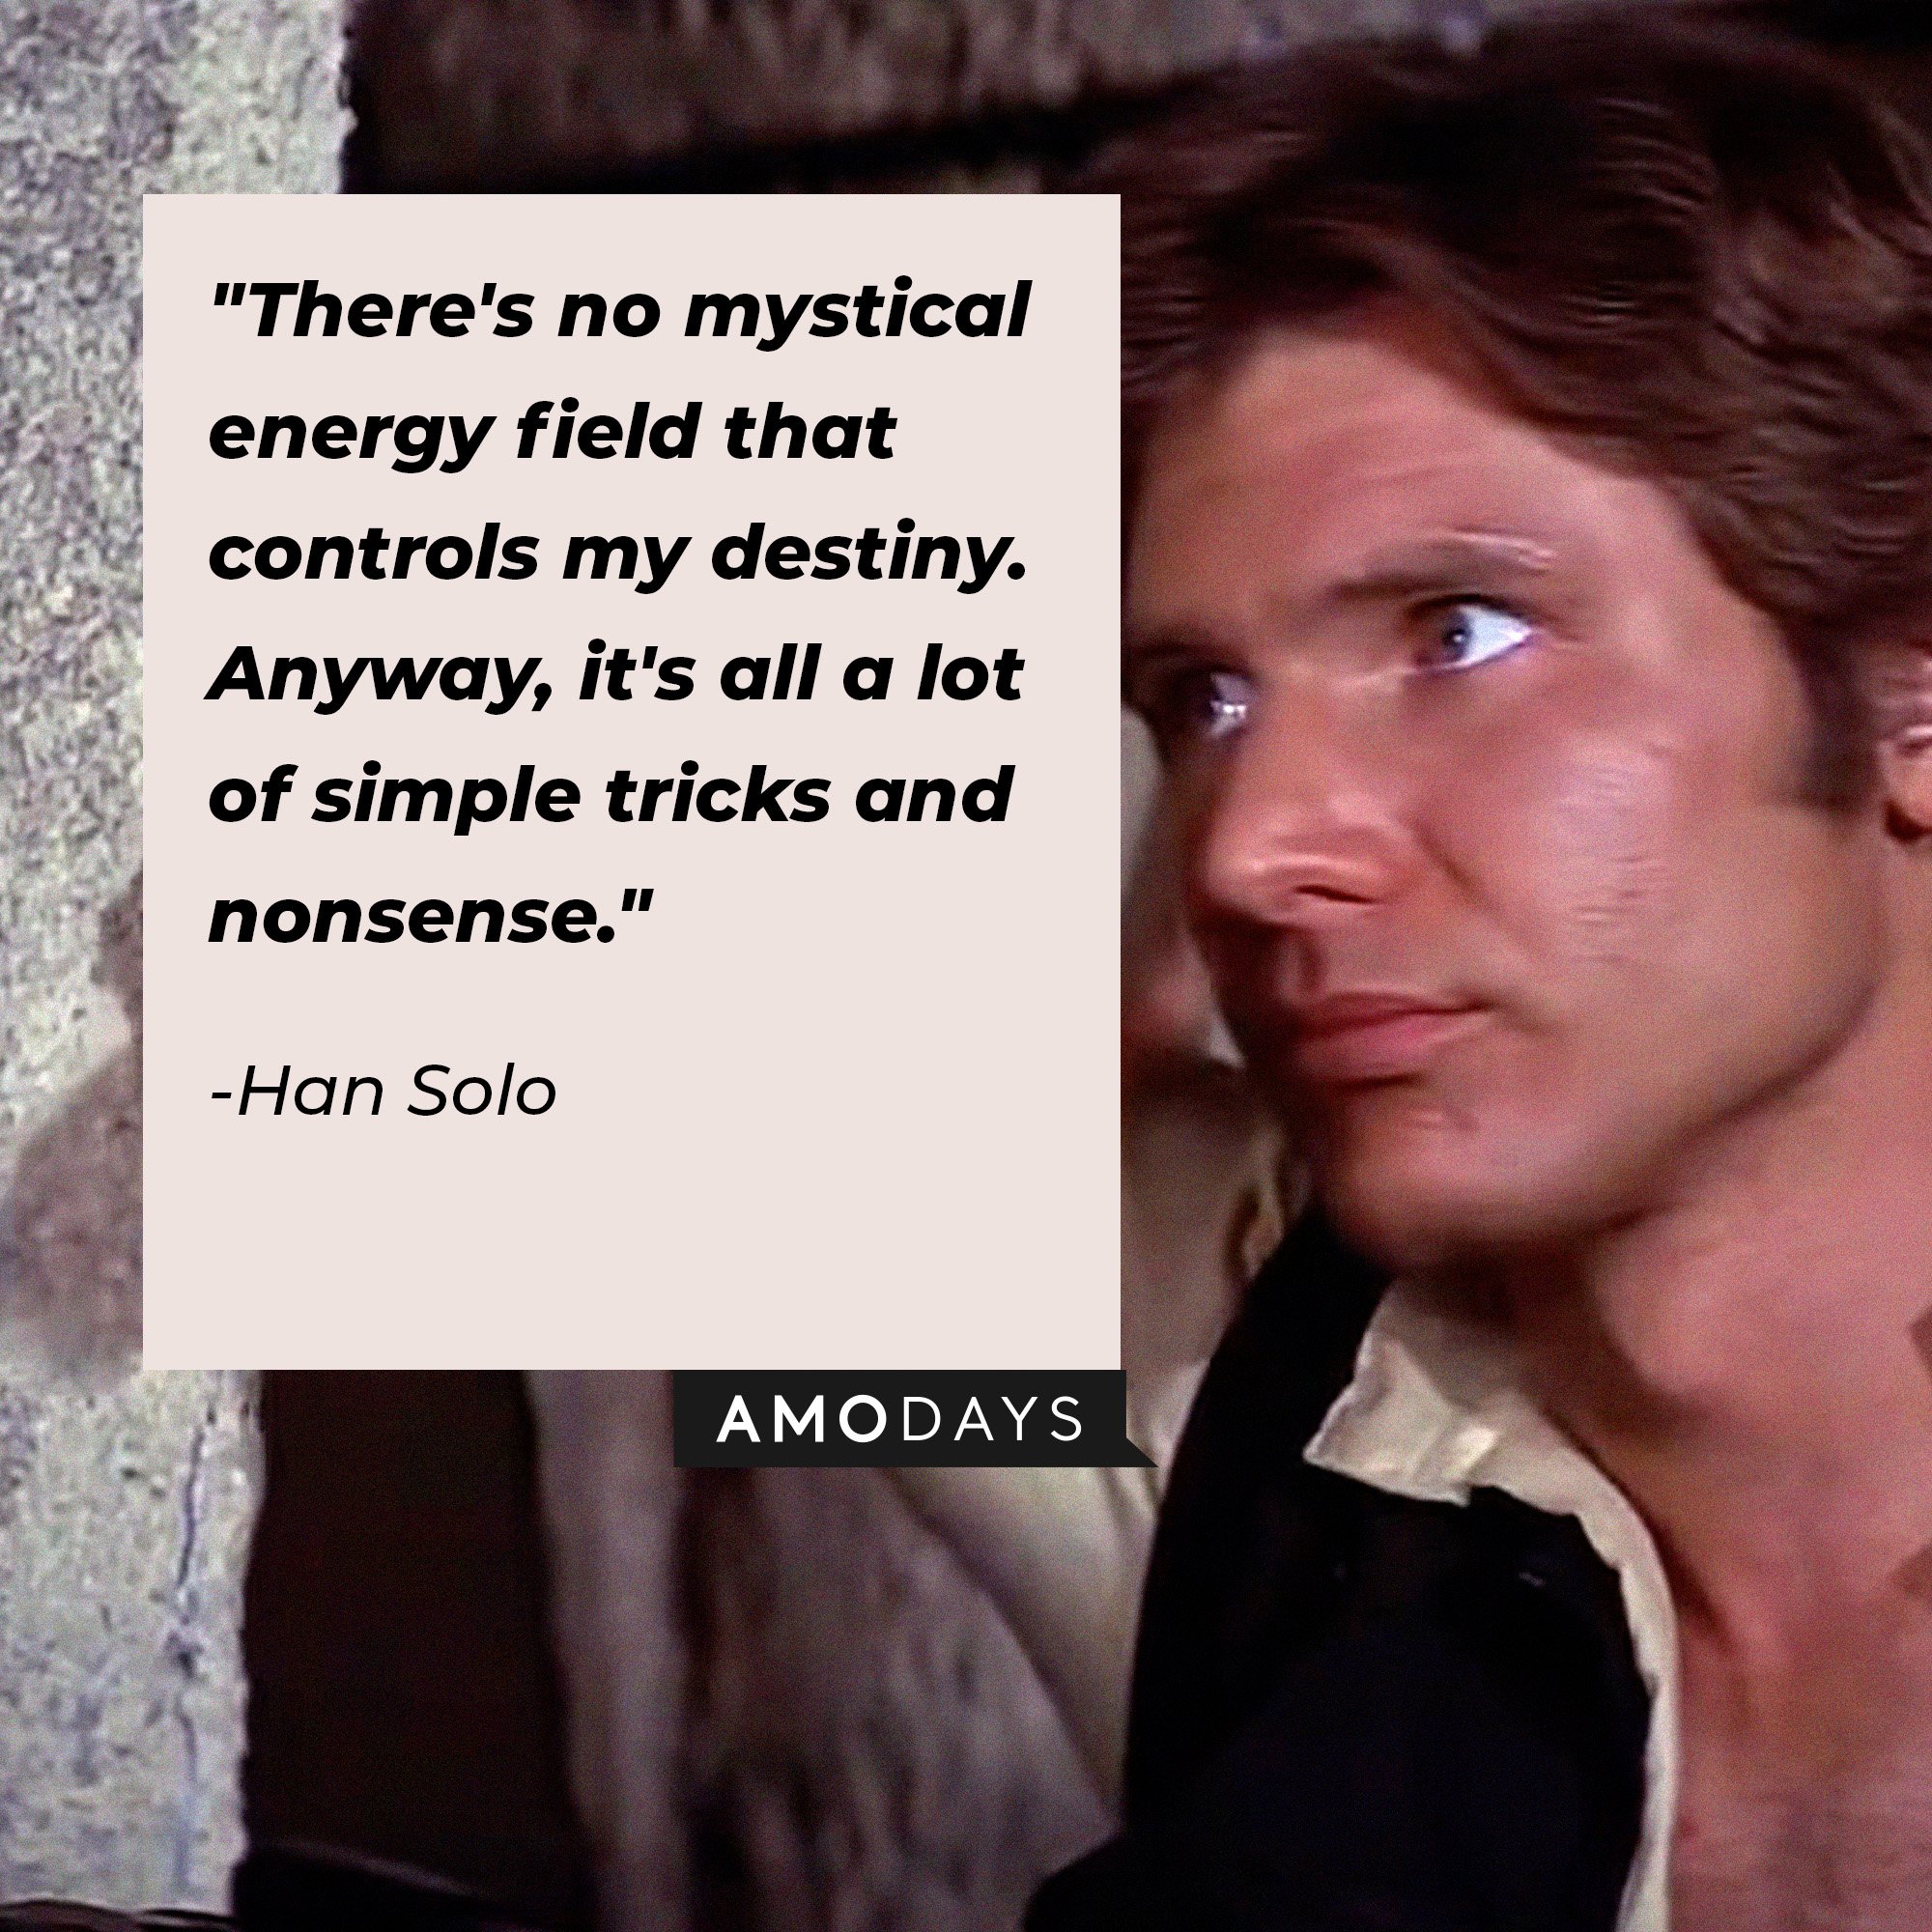 Han Solo’s quote: "There's no mystical energy field that controls my destiny. Anyway, it's all a lot of simple tricks and nonsense." | Image: AmoDays